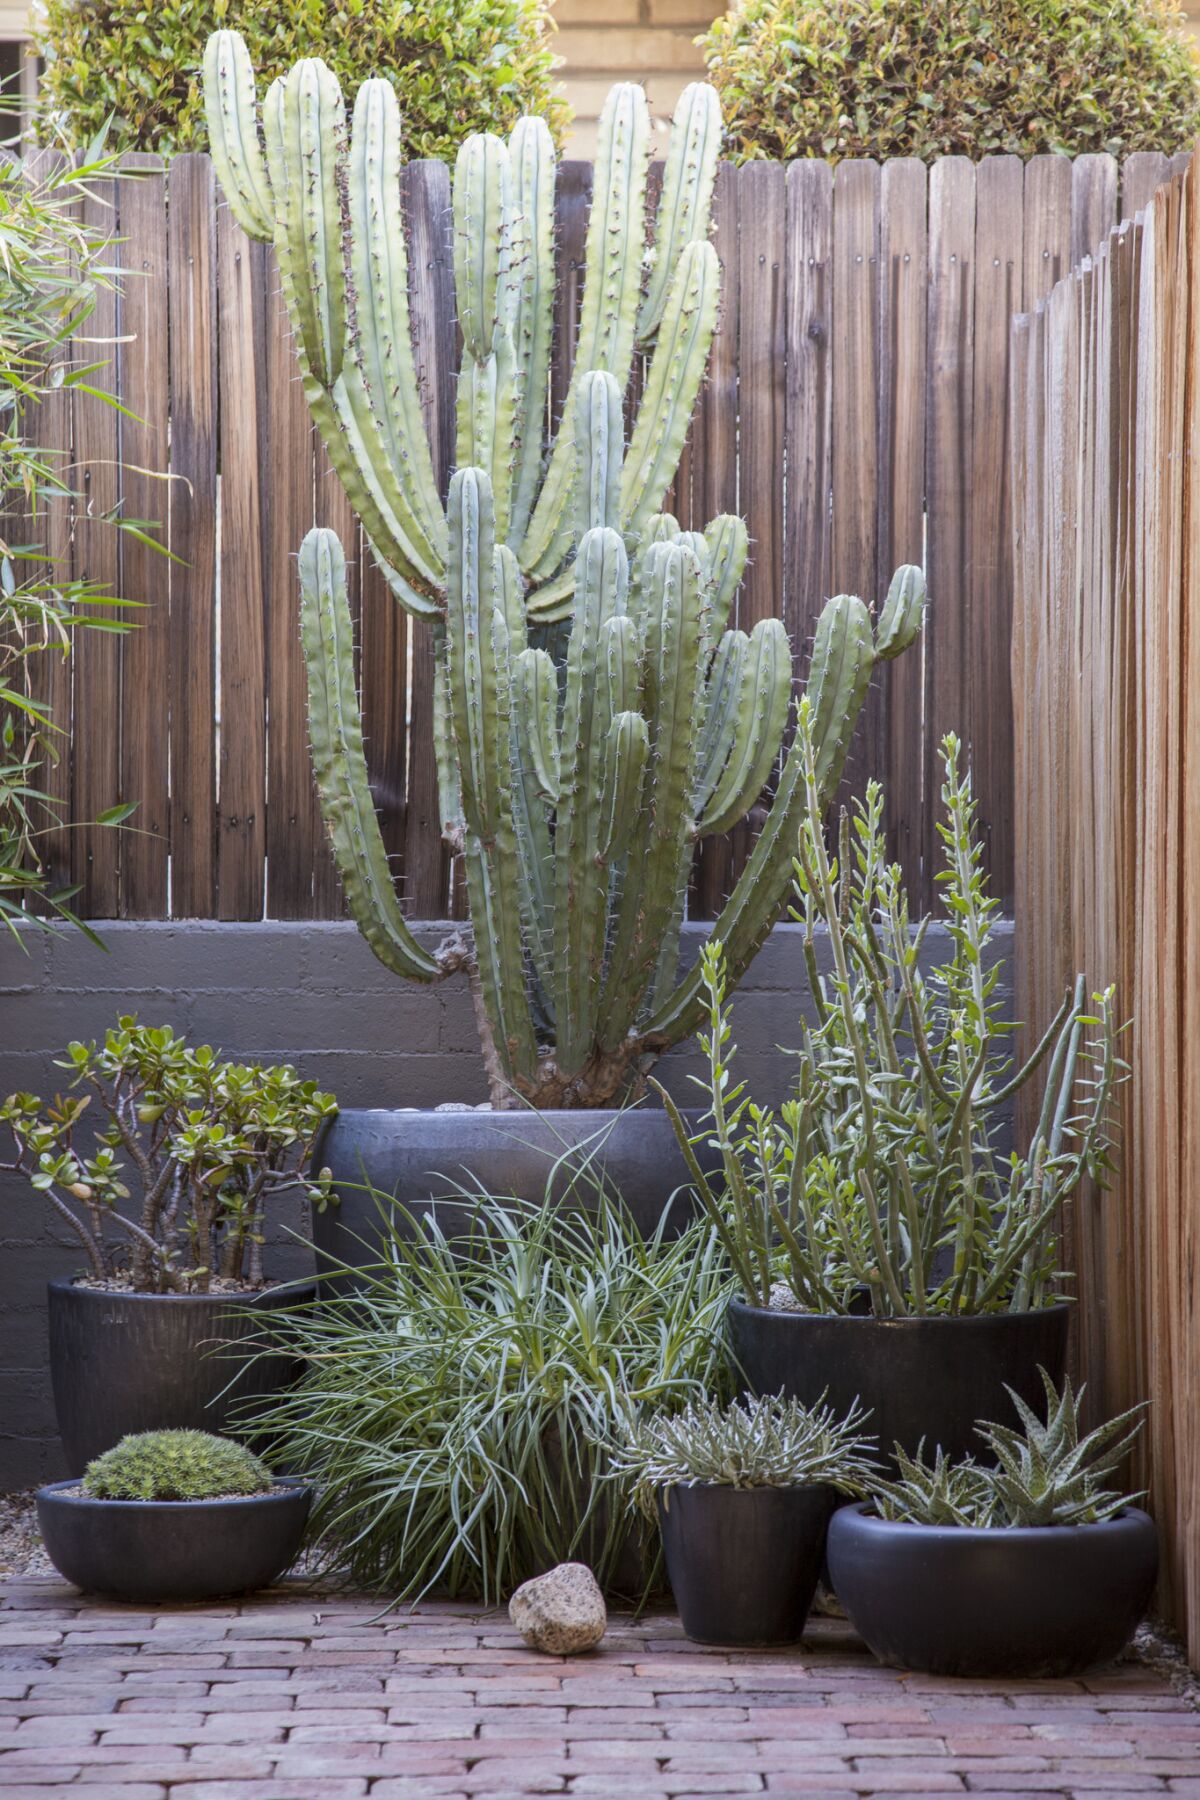 A variety of forms and textures, including those of cereus and jade plant, are showcased in pots.